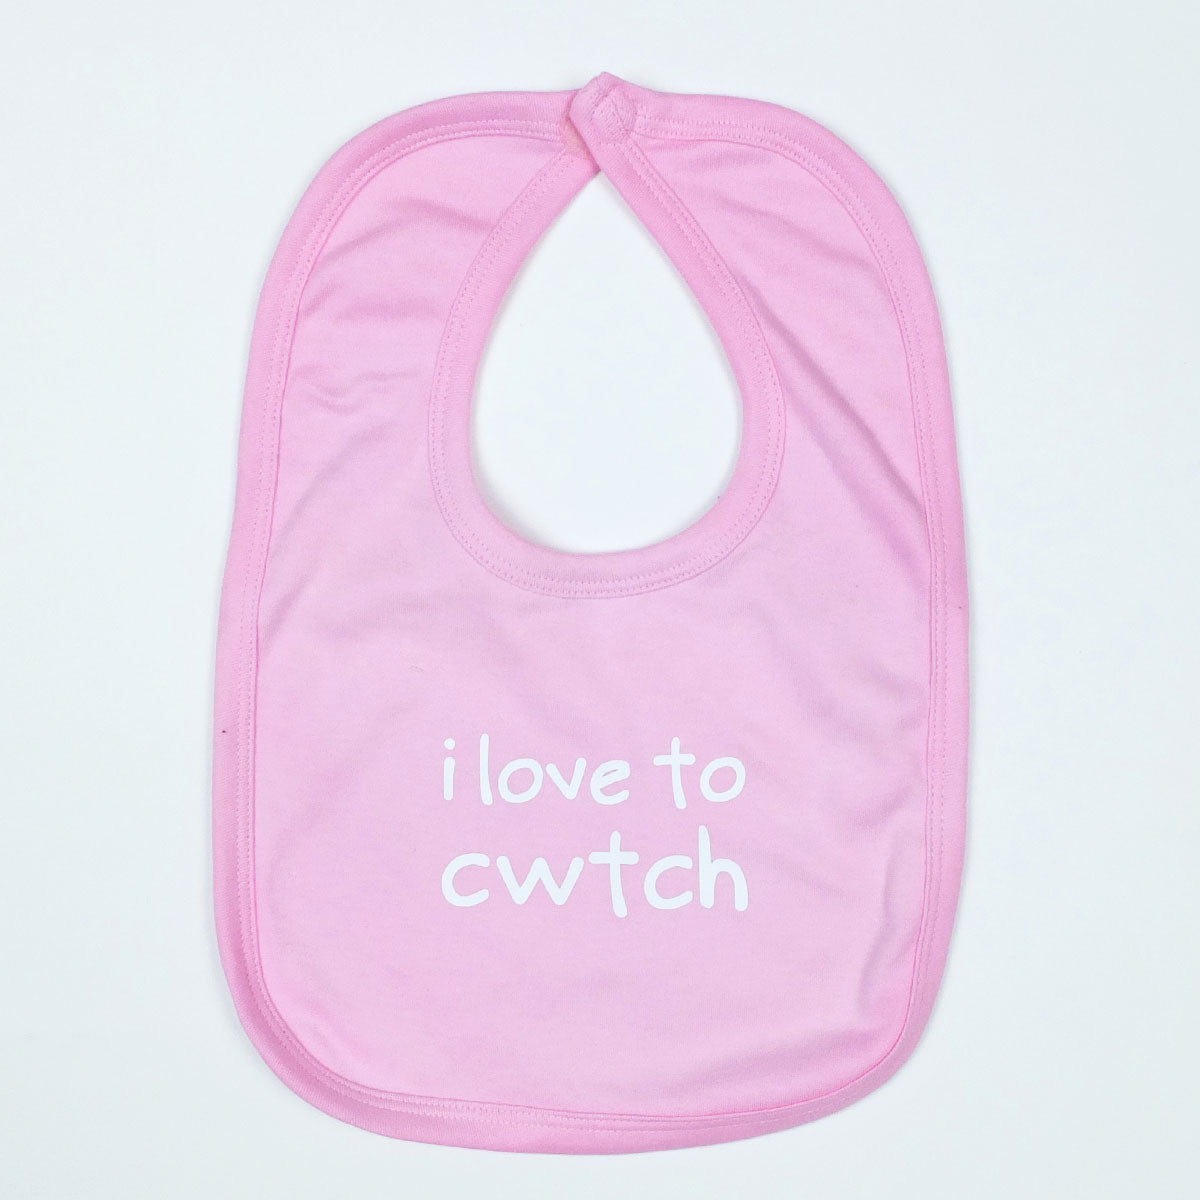 I Love to Cwtch Baby Bib in Pink